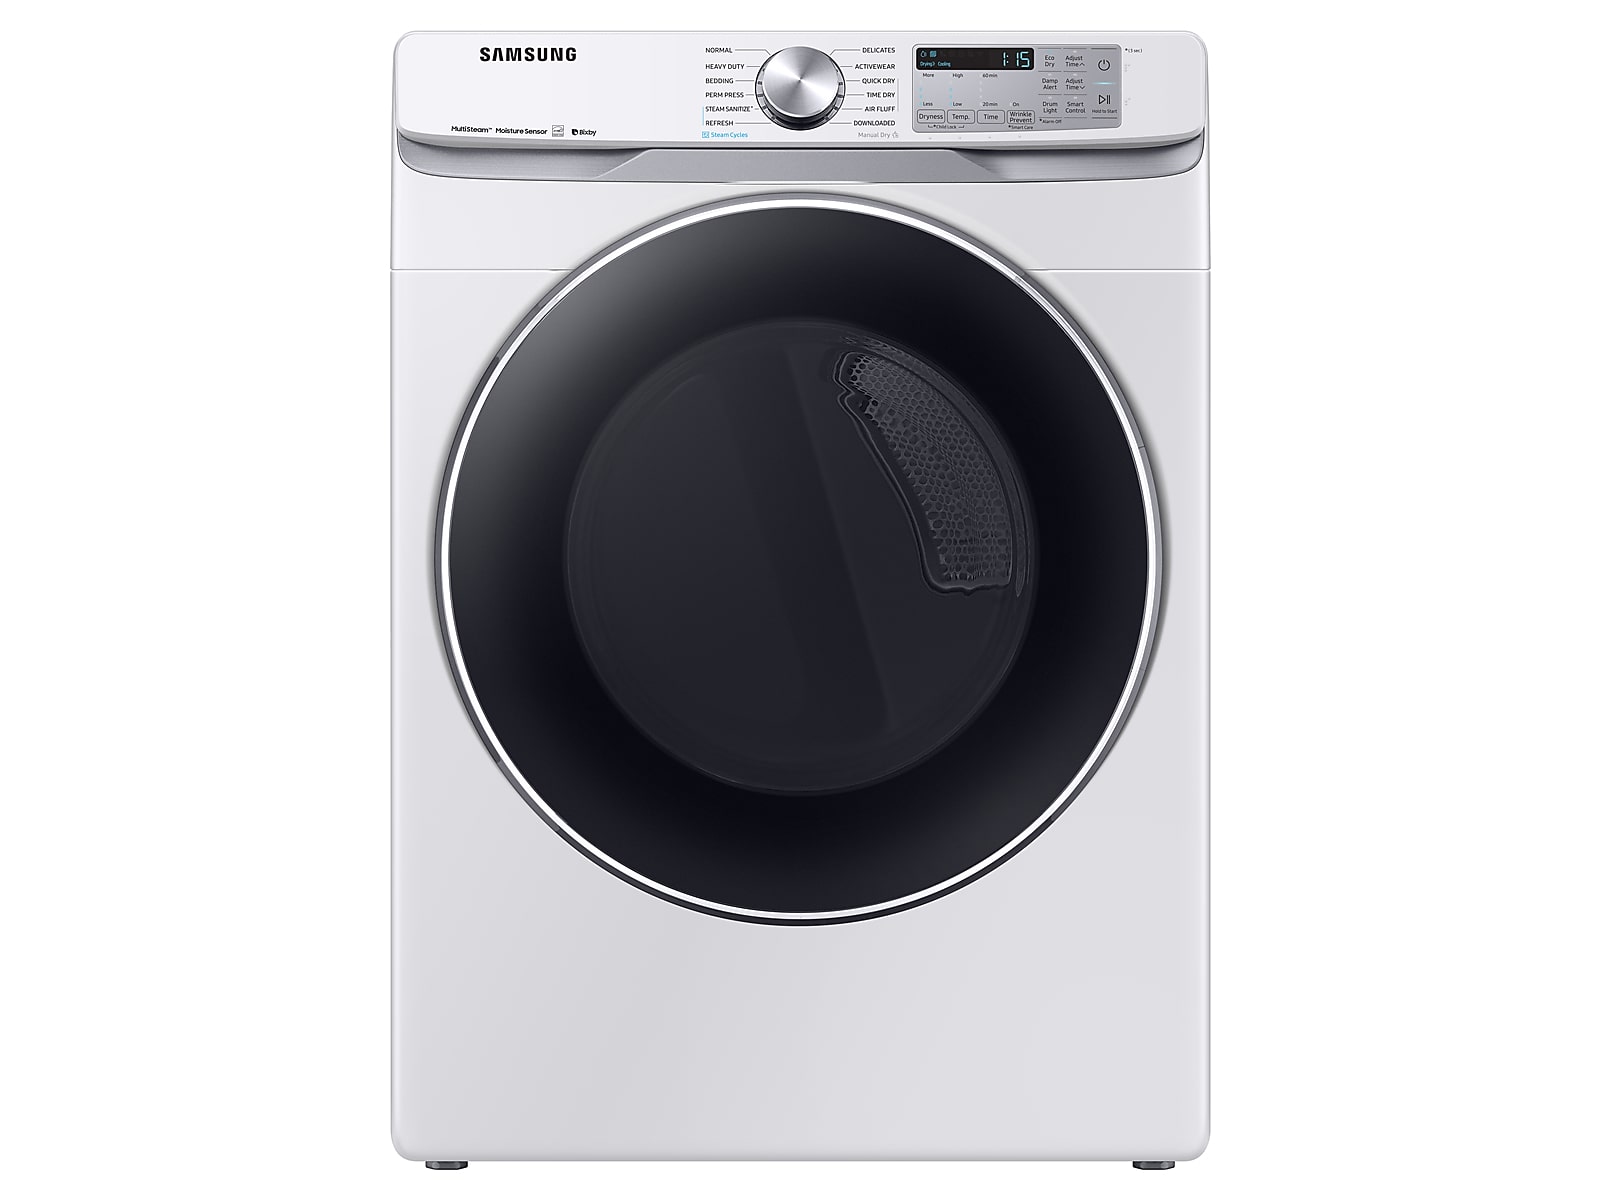 Samsung 7.5 cu. ft. Smart Electric Dryer with Steam Sanitize+ in White(DVE45R6300W/A3)